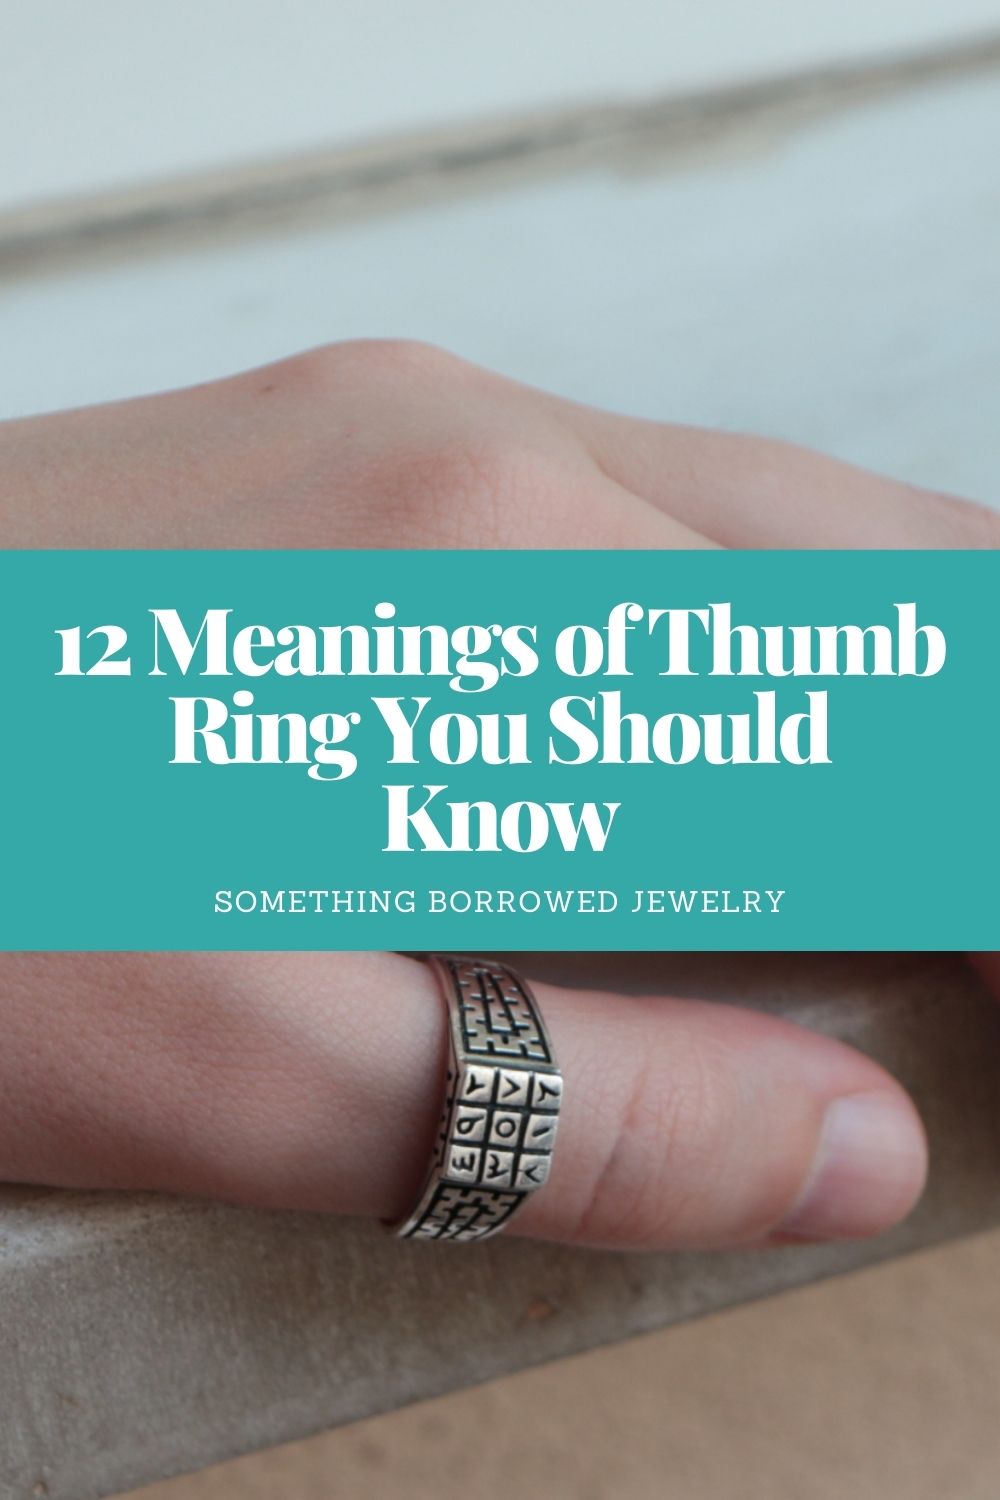 12 Meanings of Thumb Ring You Should Know